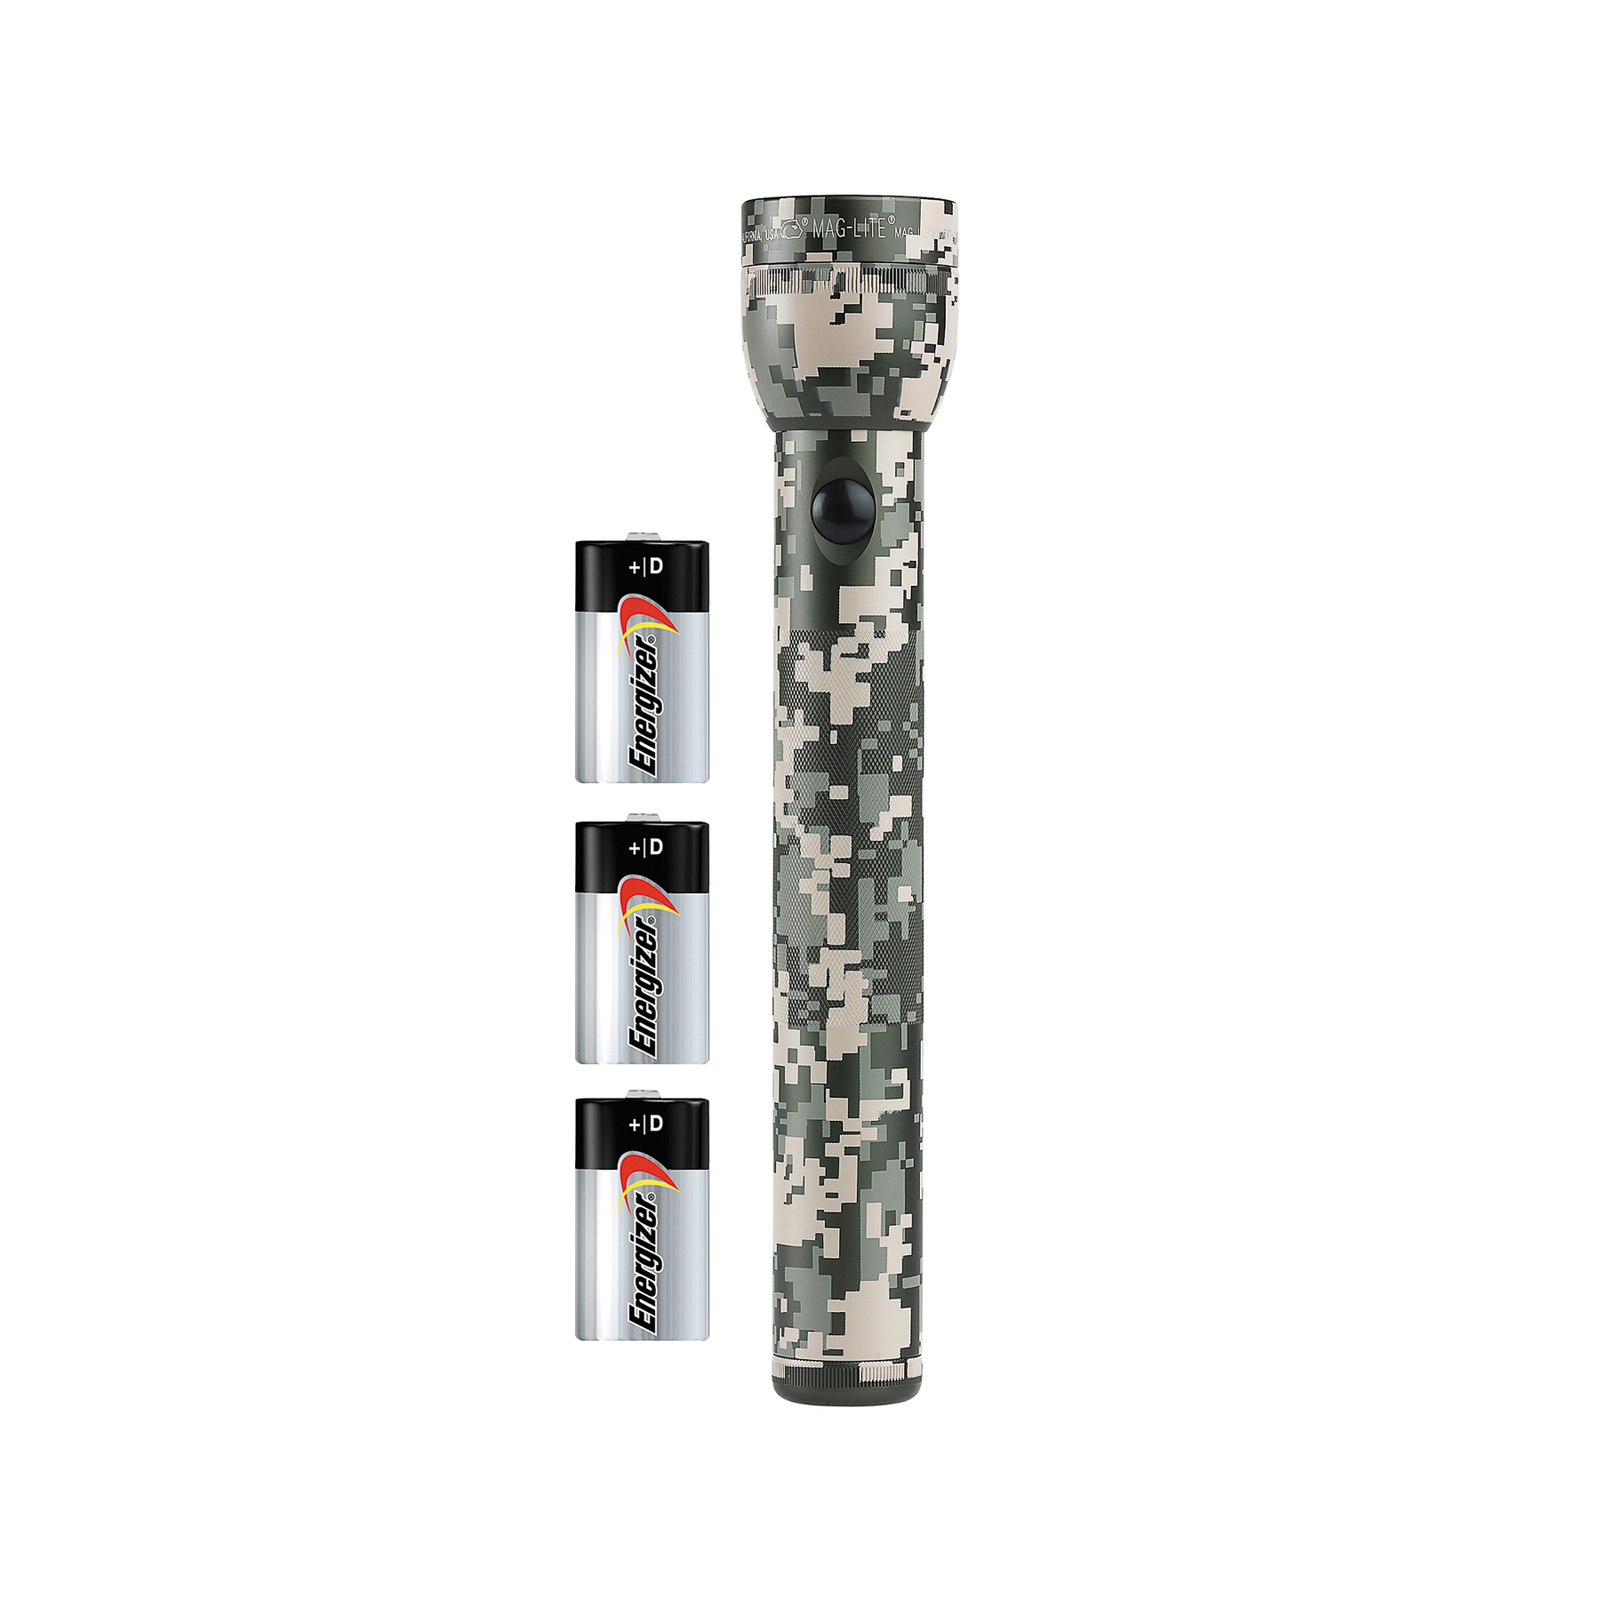 Maglite zaklamp S3DMR, 3 Cell D, Box, Camouflage